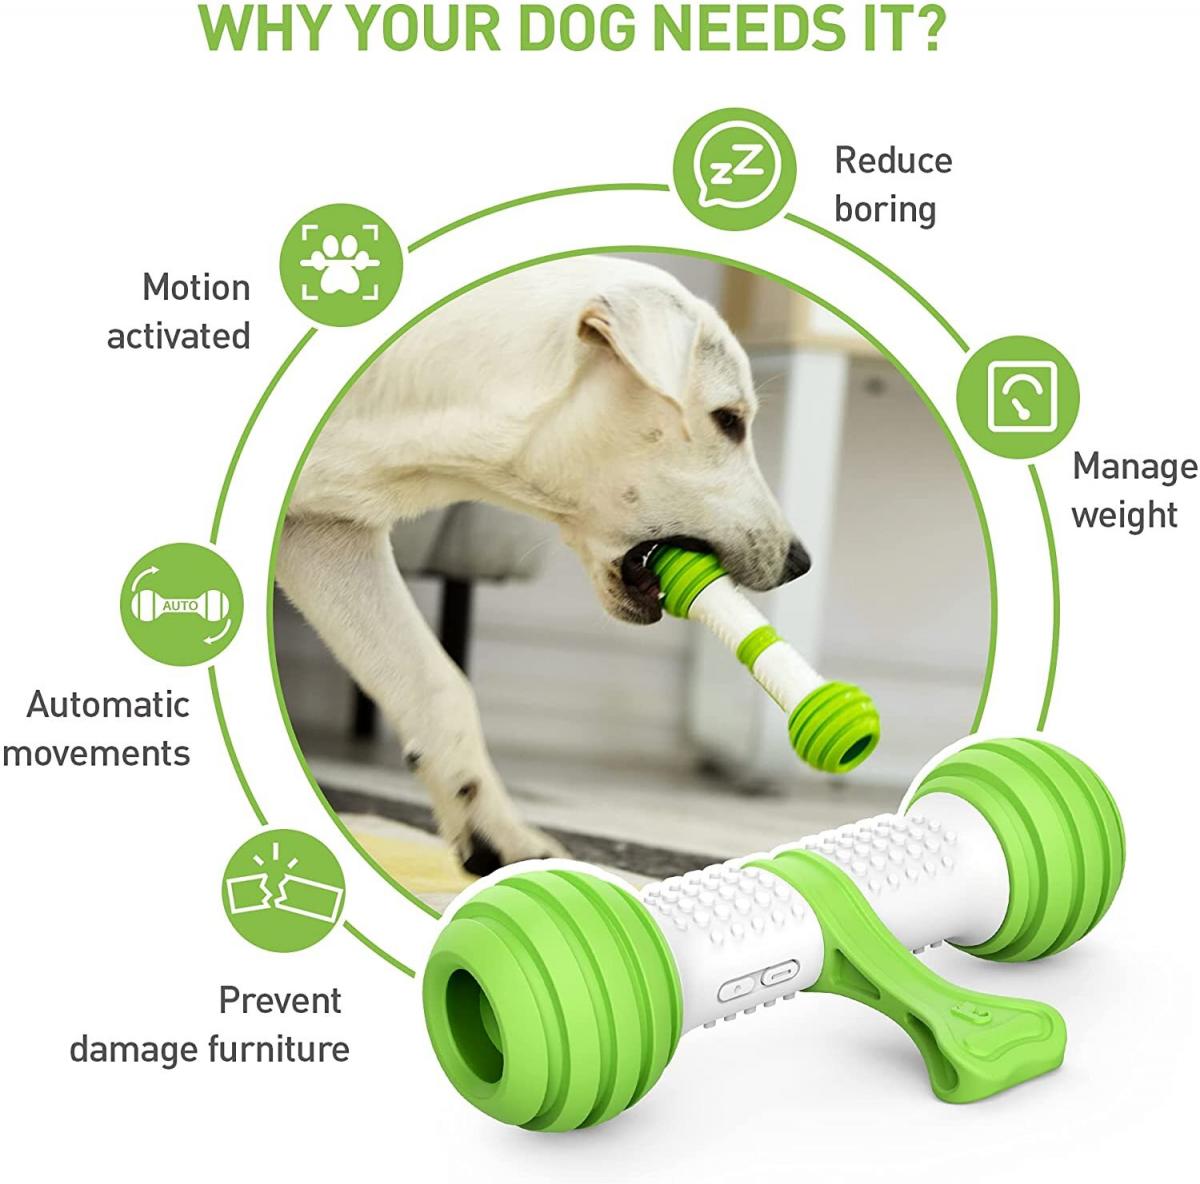 PETGEEK Interactive Dog Bone Toys, Electronic Dog Enrichment Toys to Chase,  Automatic Dog Moving Toy for Medium & Large Dogs Boredom, USB Rechargeable